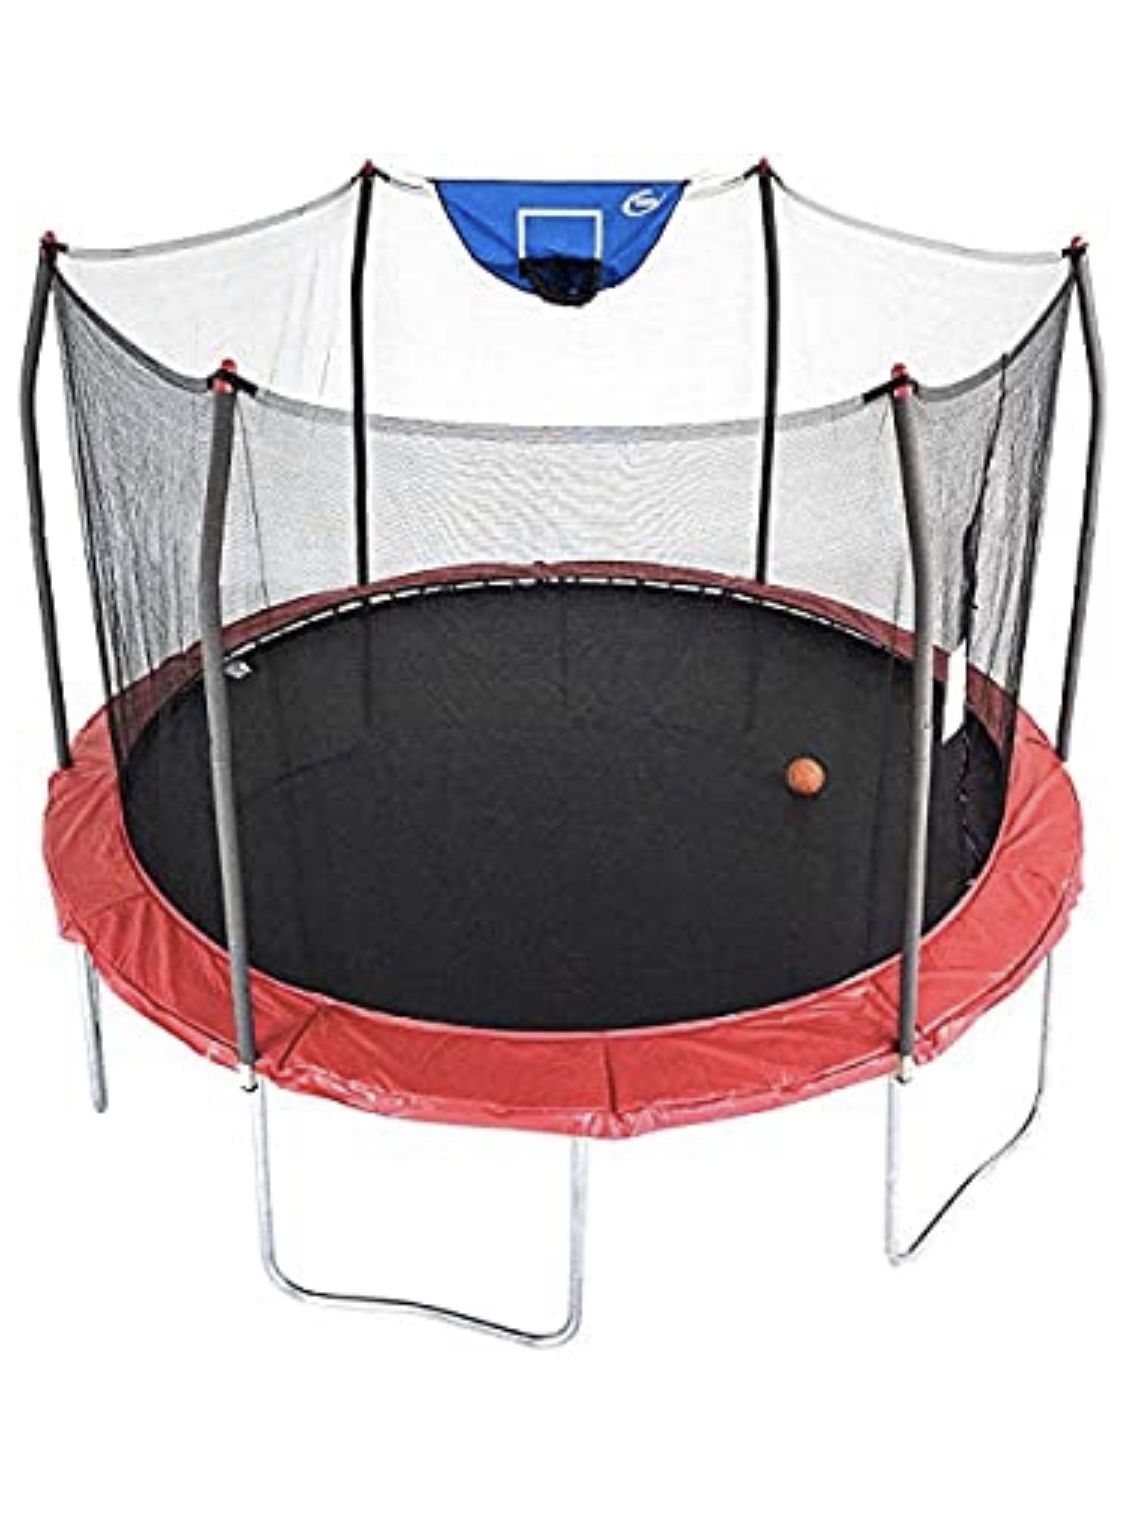 New! 12 Ft trampoline set with basketball hoop